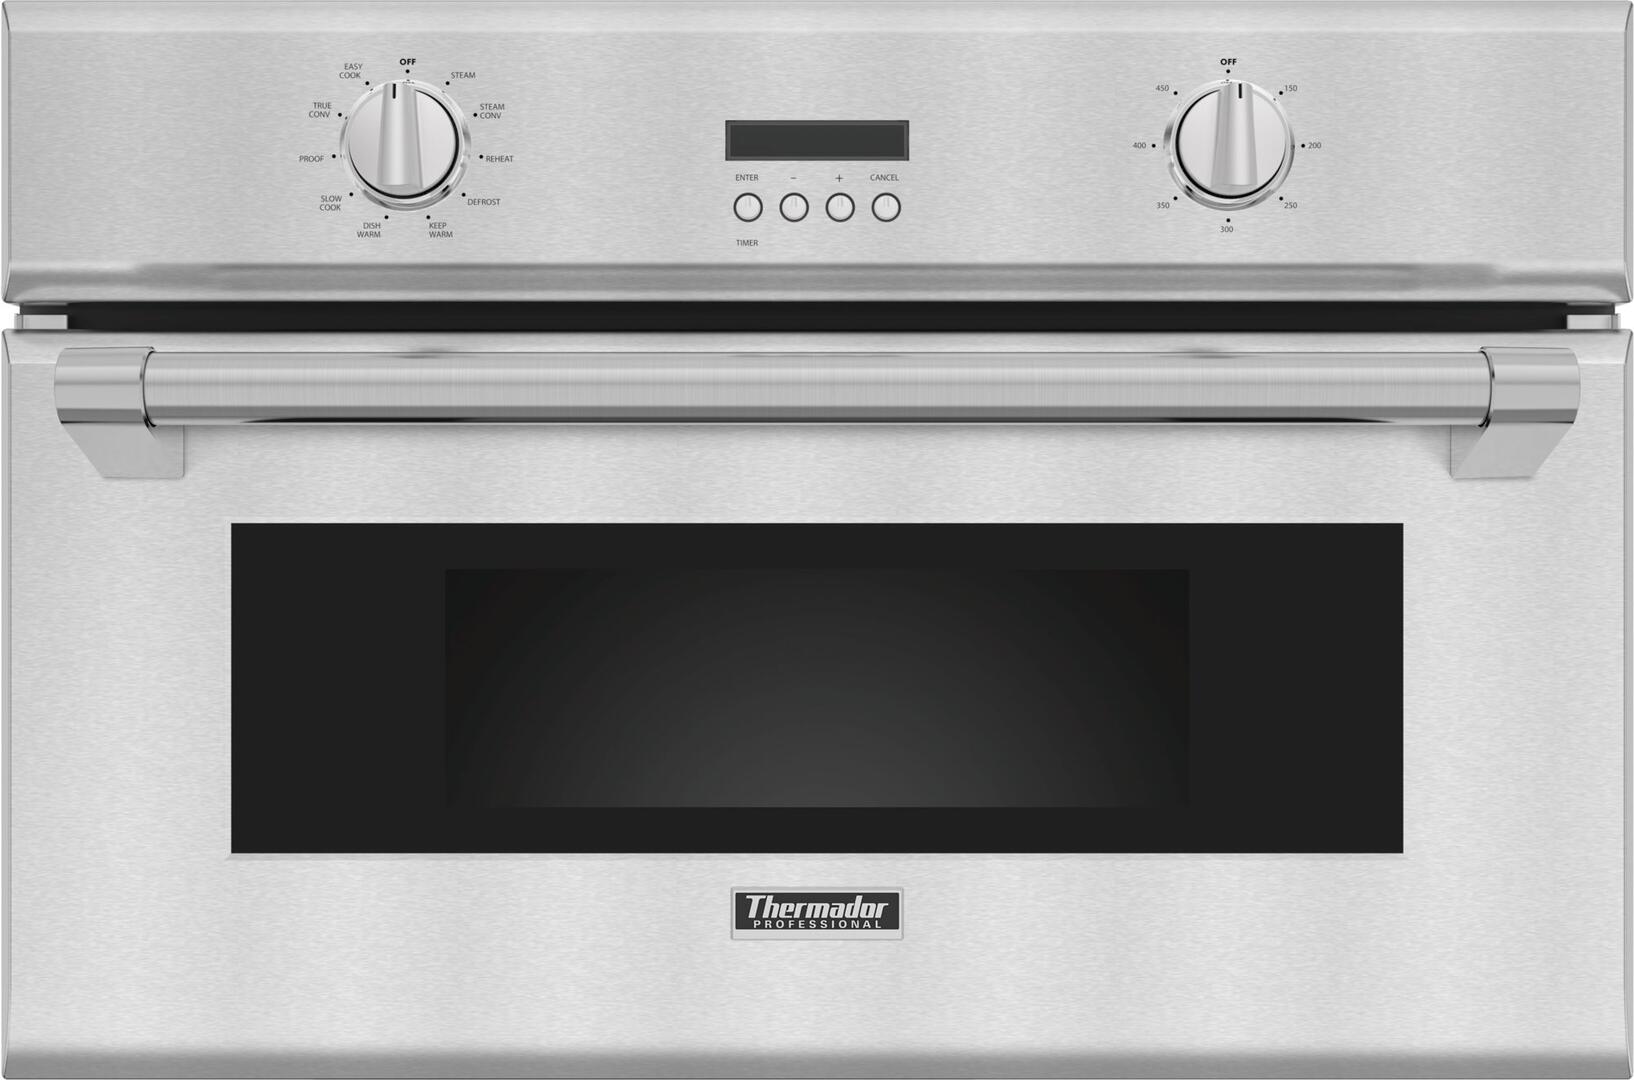 Electric ovens with steam фото 33